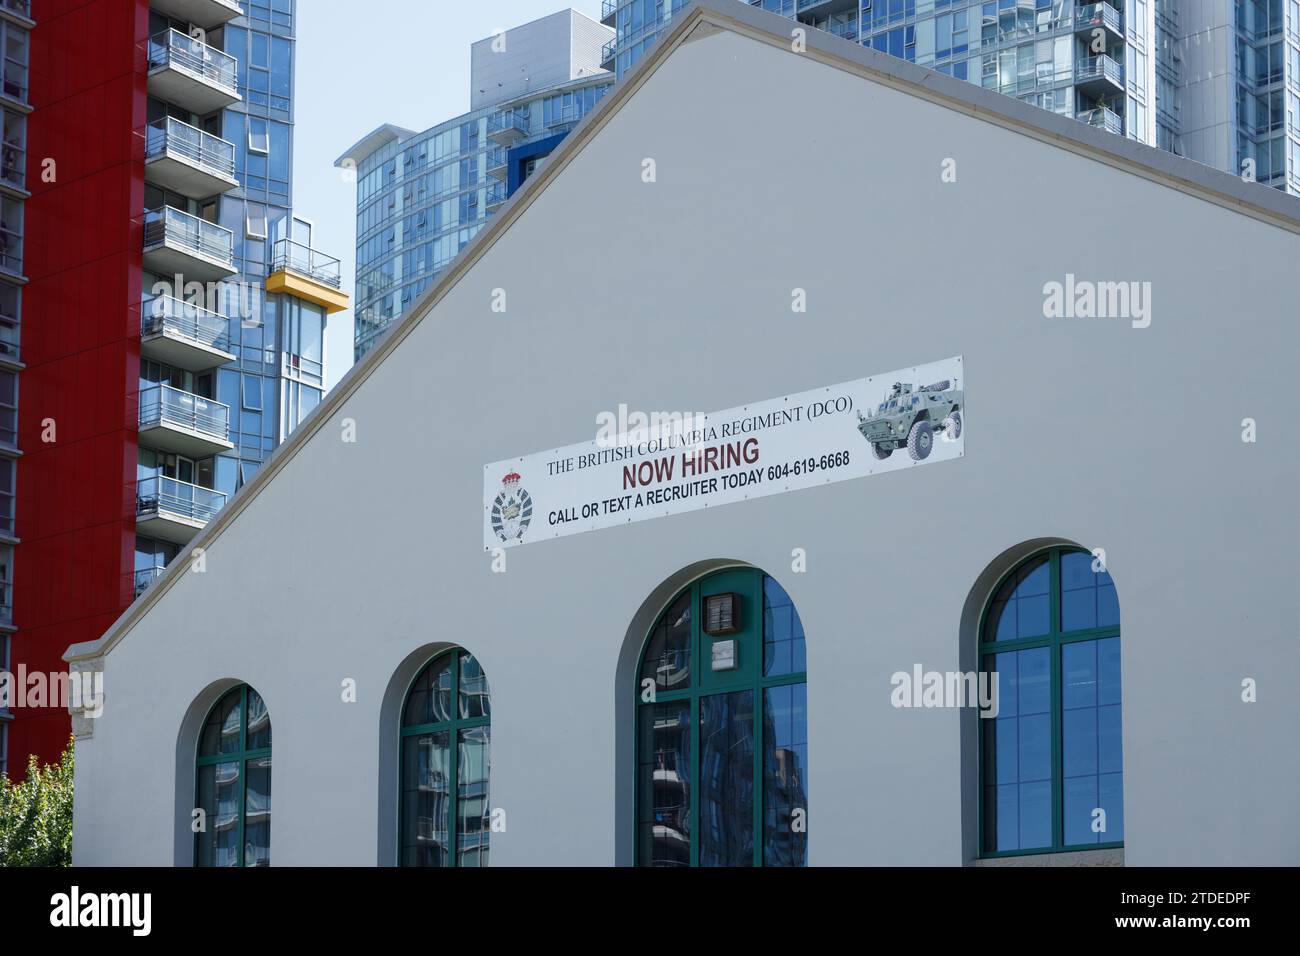 Vancouver, Canada - July 1,2023: The British Columbia Regiment(DCO) building with a sign NOW HIRING Stock Photo